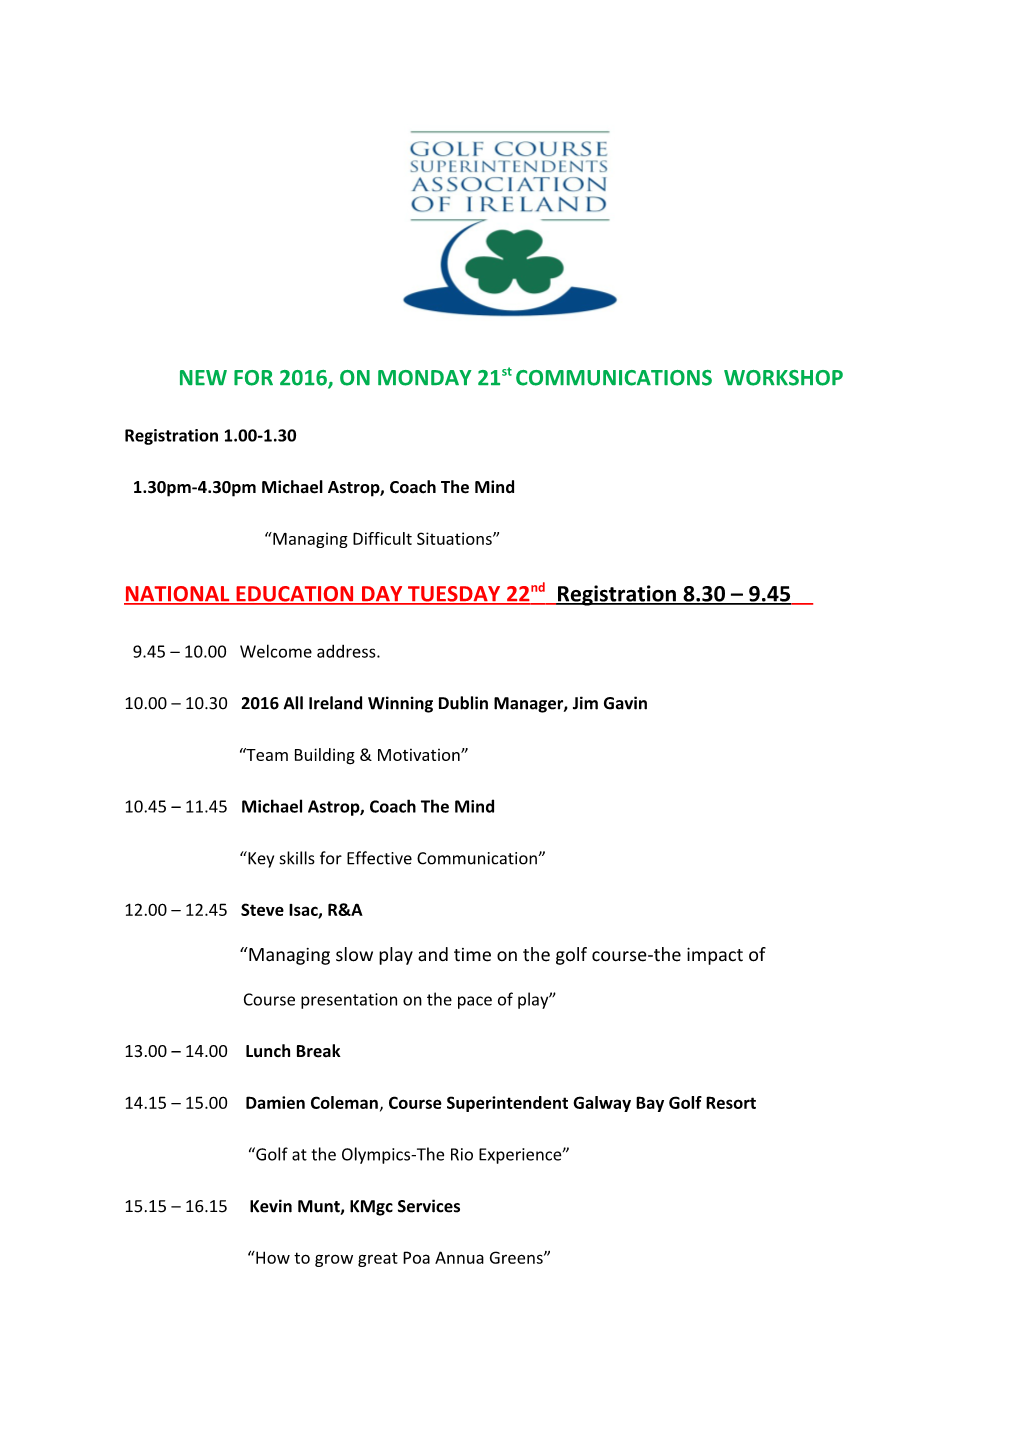 NEW for 2016, on MONDAY 21Stcommunications WORKSHOP